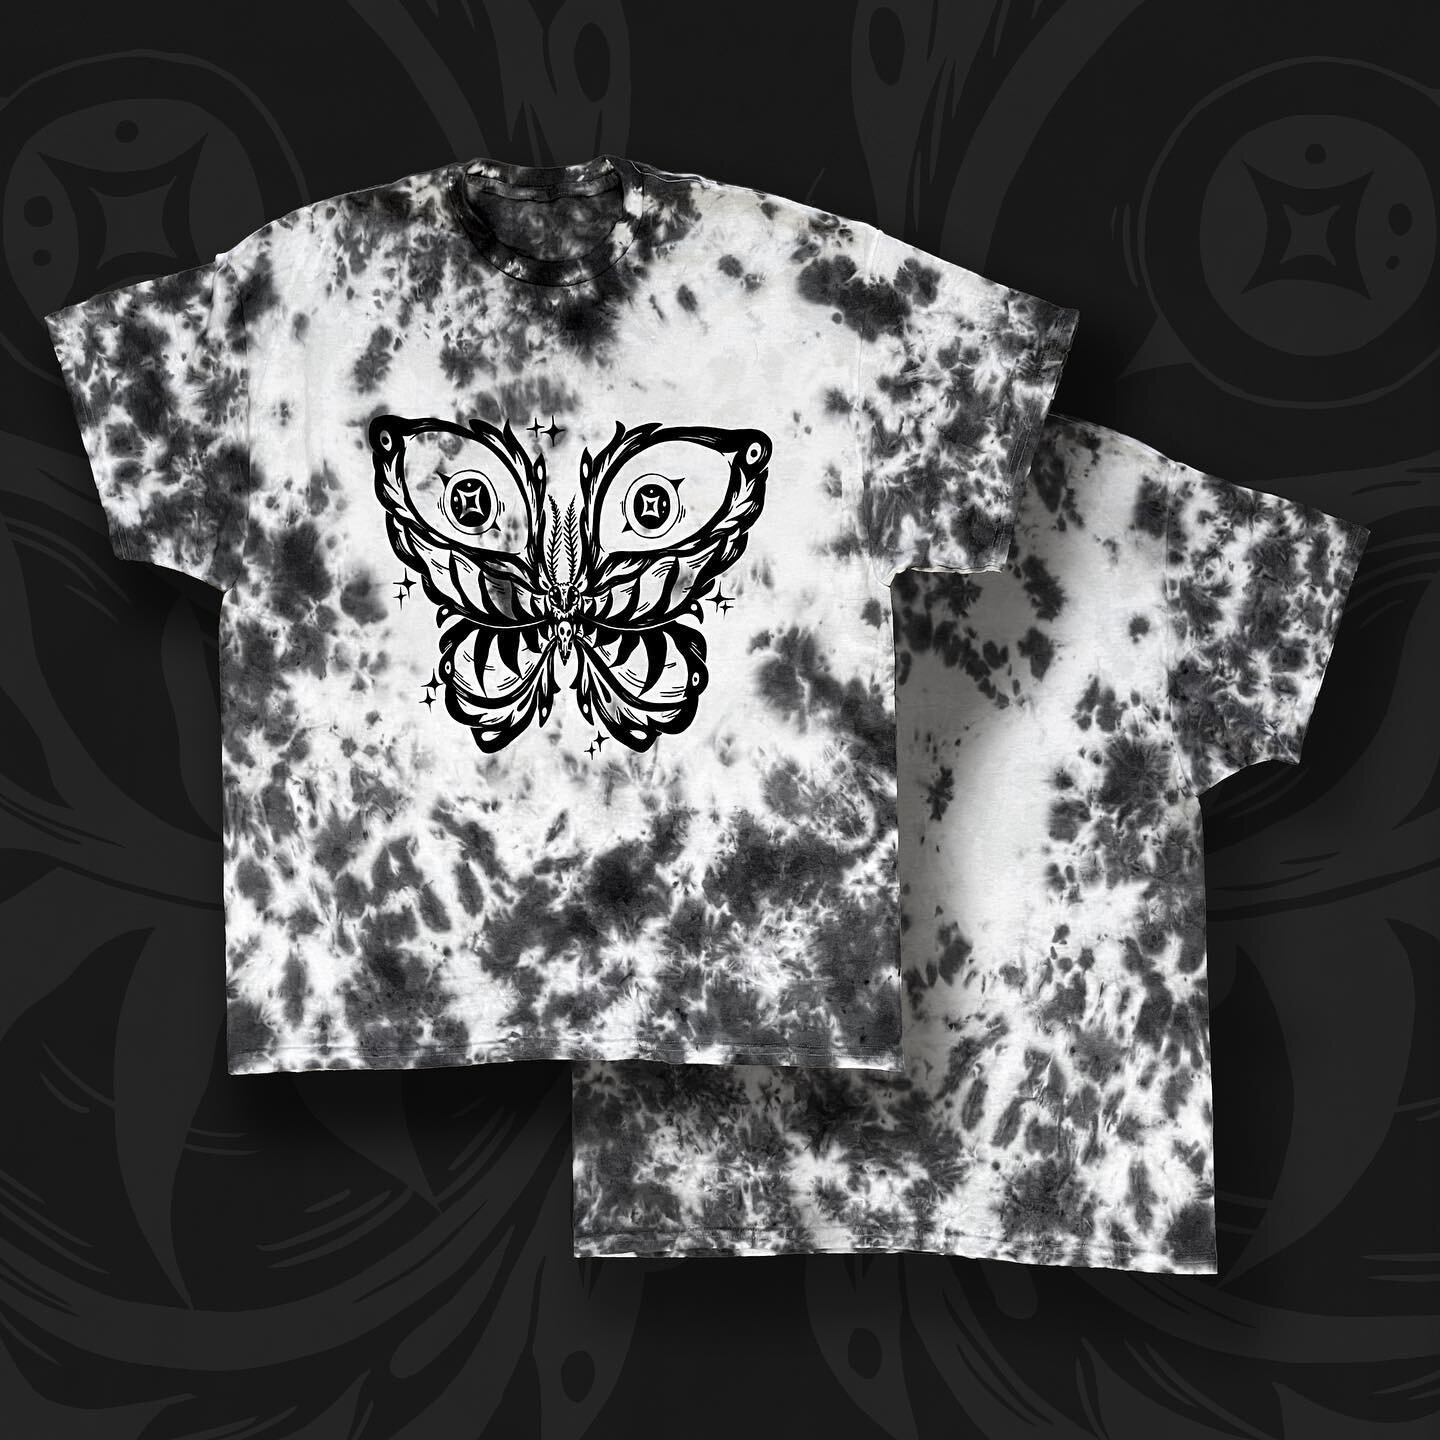 MERCH ALERT!!! Upgrade your shirt stock with this beautiful Demon Butterfly on a hand dyed cotton blend t-shirt. Follow the link in my bio to order! 
.
.
.
.
.
#illustration #tiedye #handdyed #butterfly #merch #tshirt #tshirtdesign